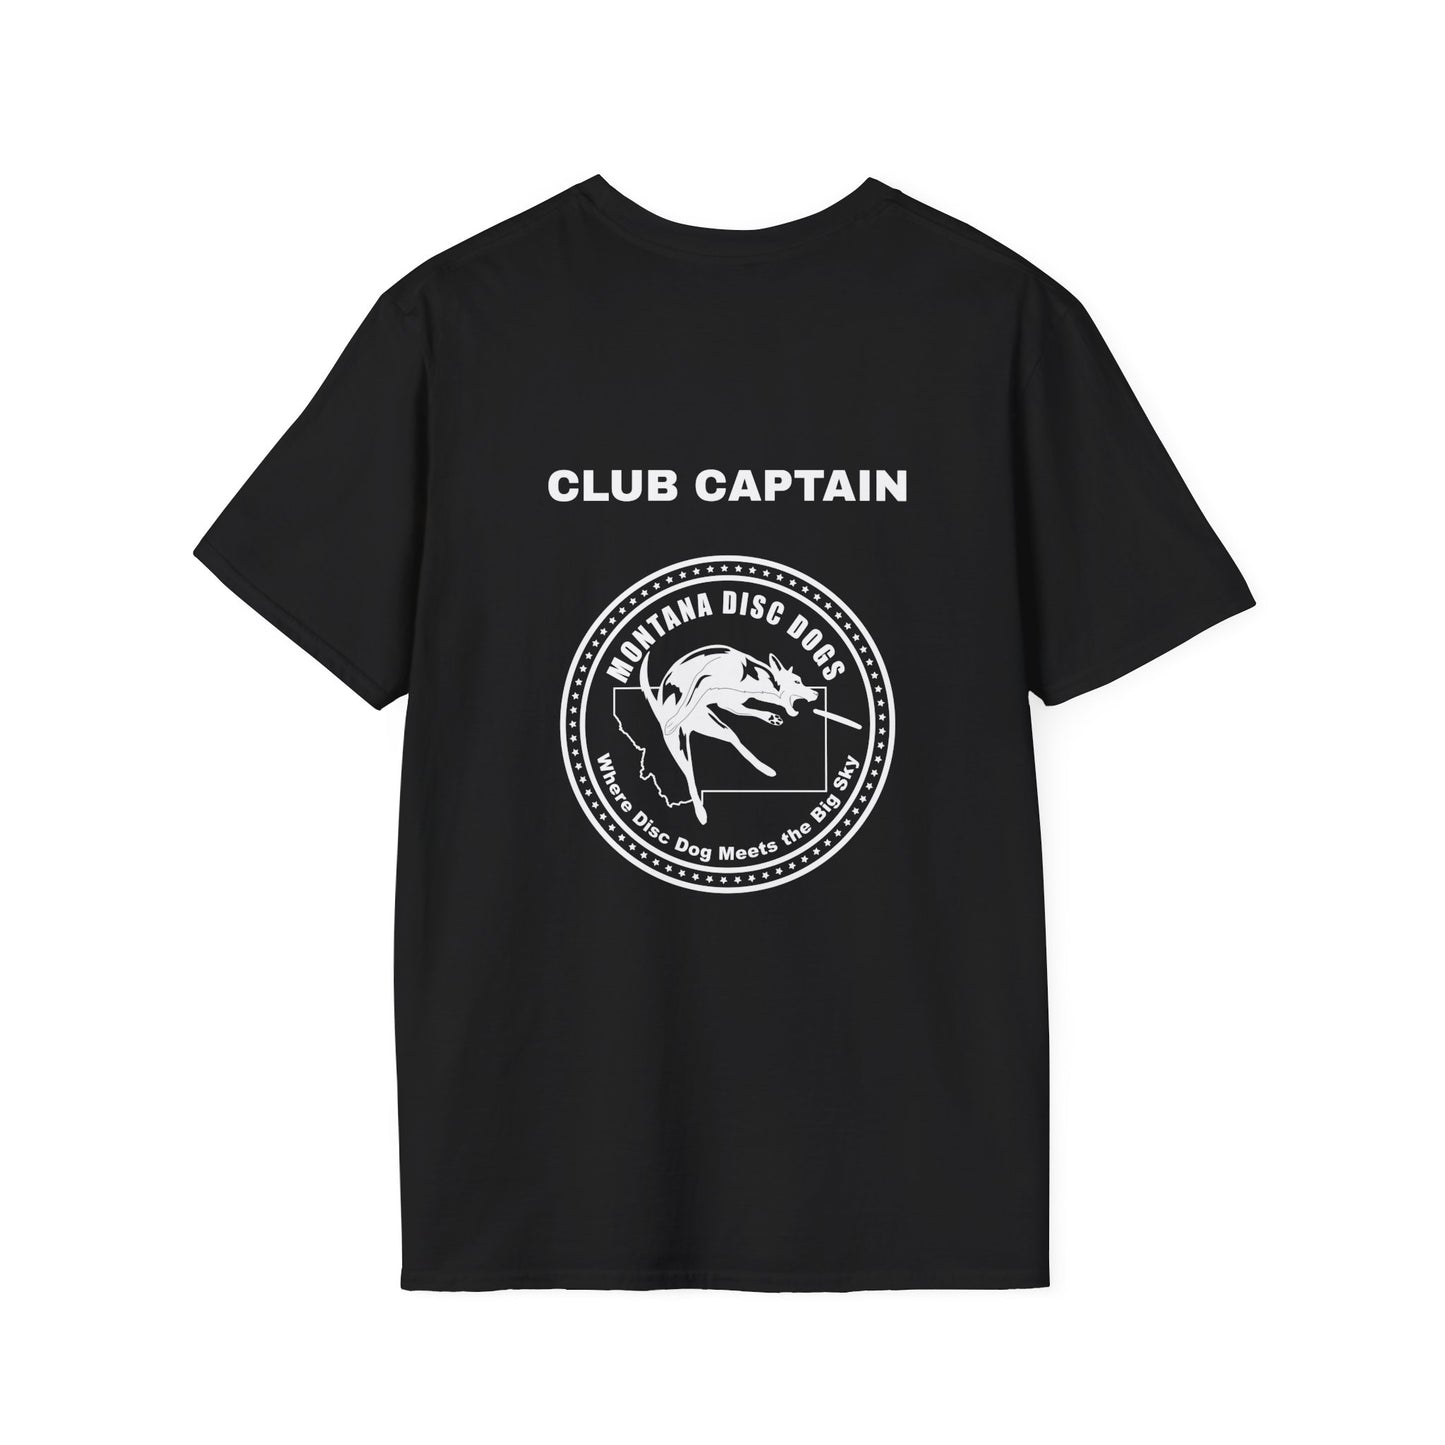 *CLUB CAPTAIN MONTANA DISC DOGS Unisex Softstyle T-Shirt